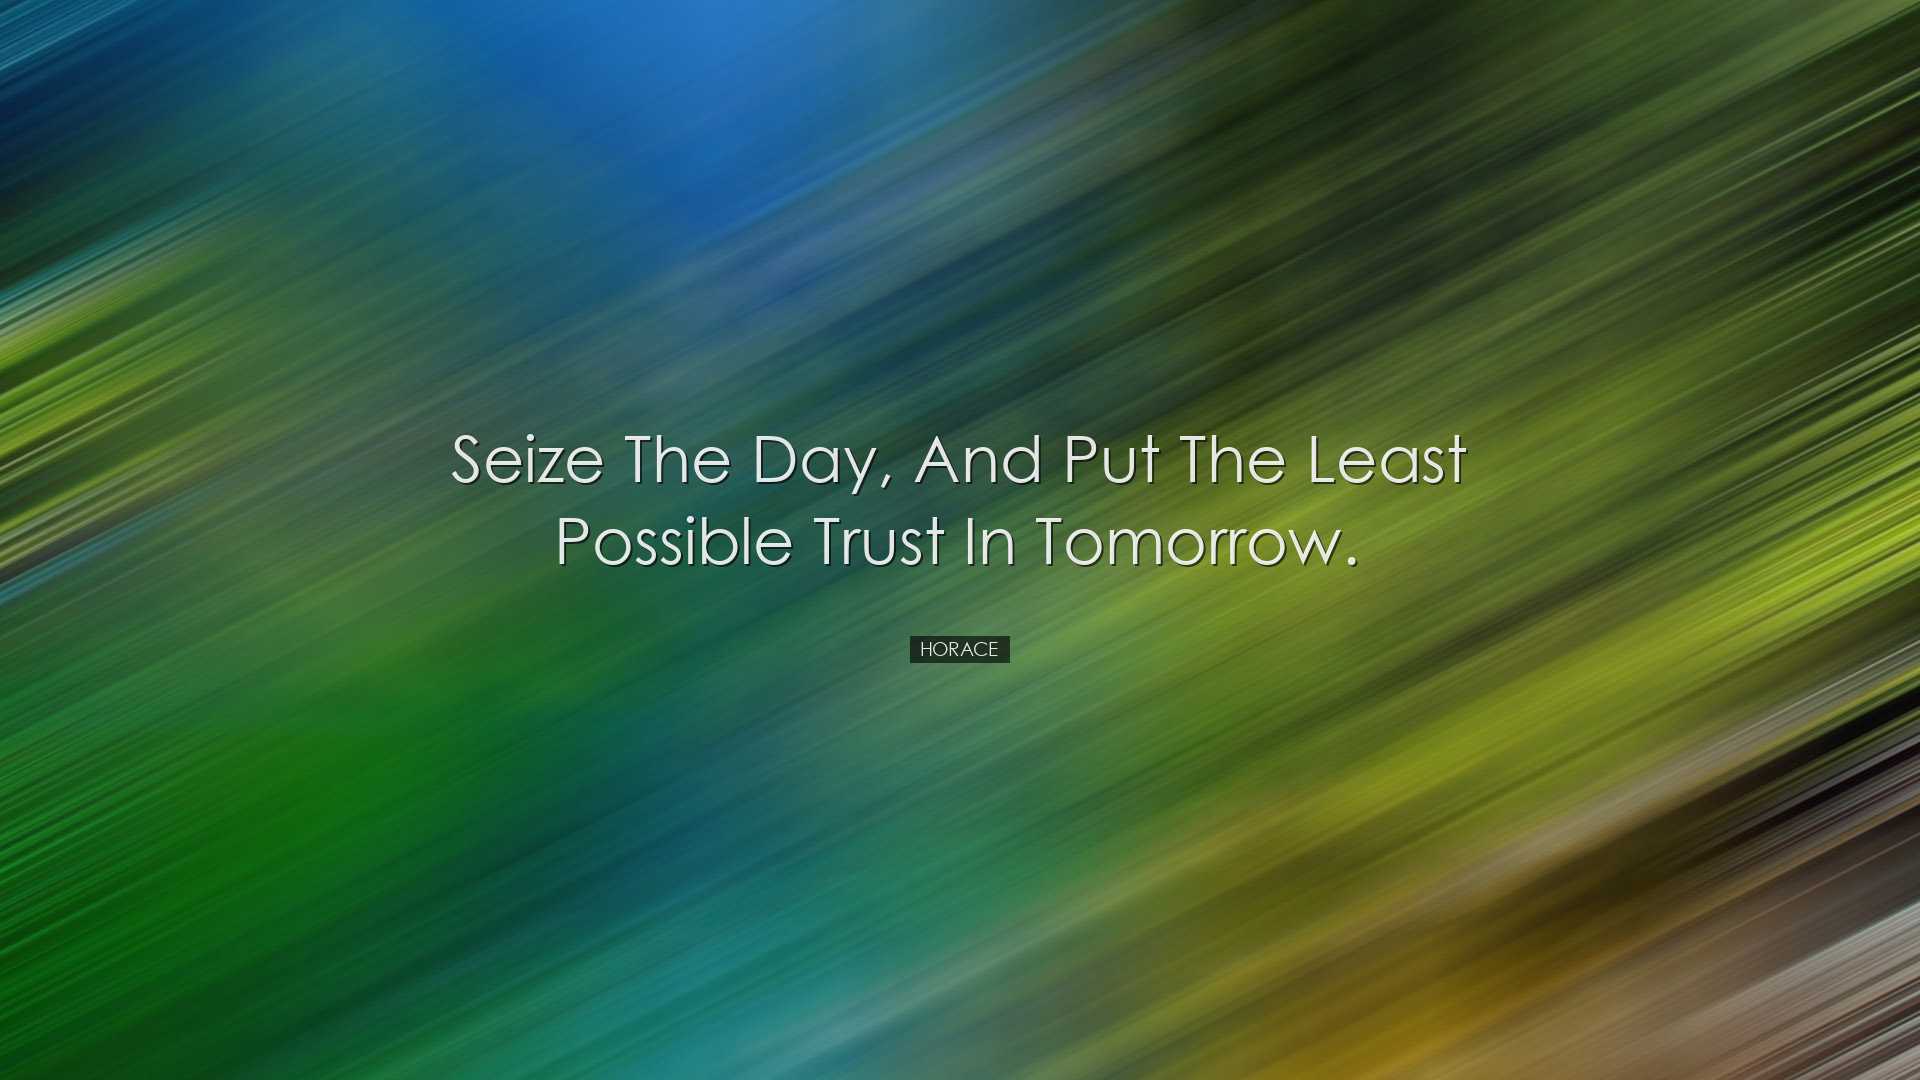 Seize the day, and put the least possible trust in tomorrow. - Hor